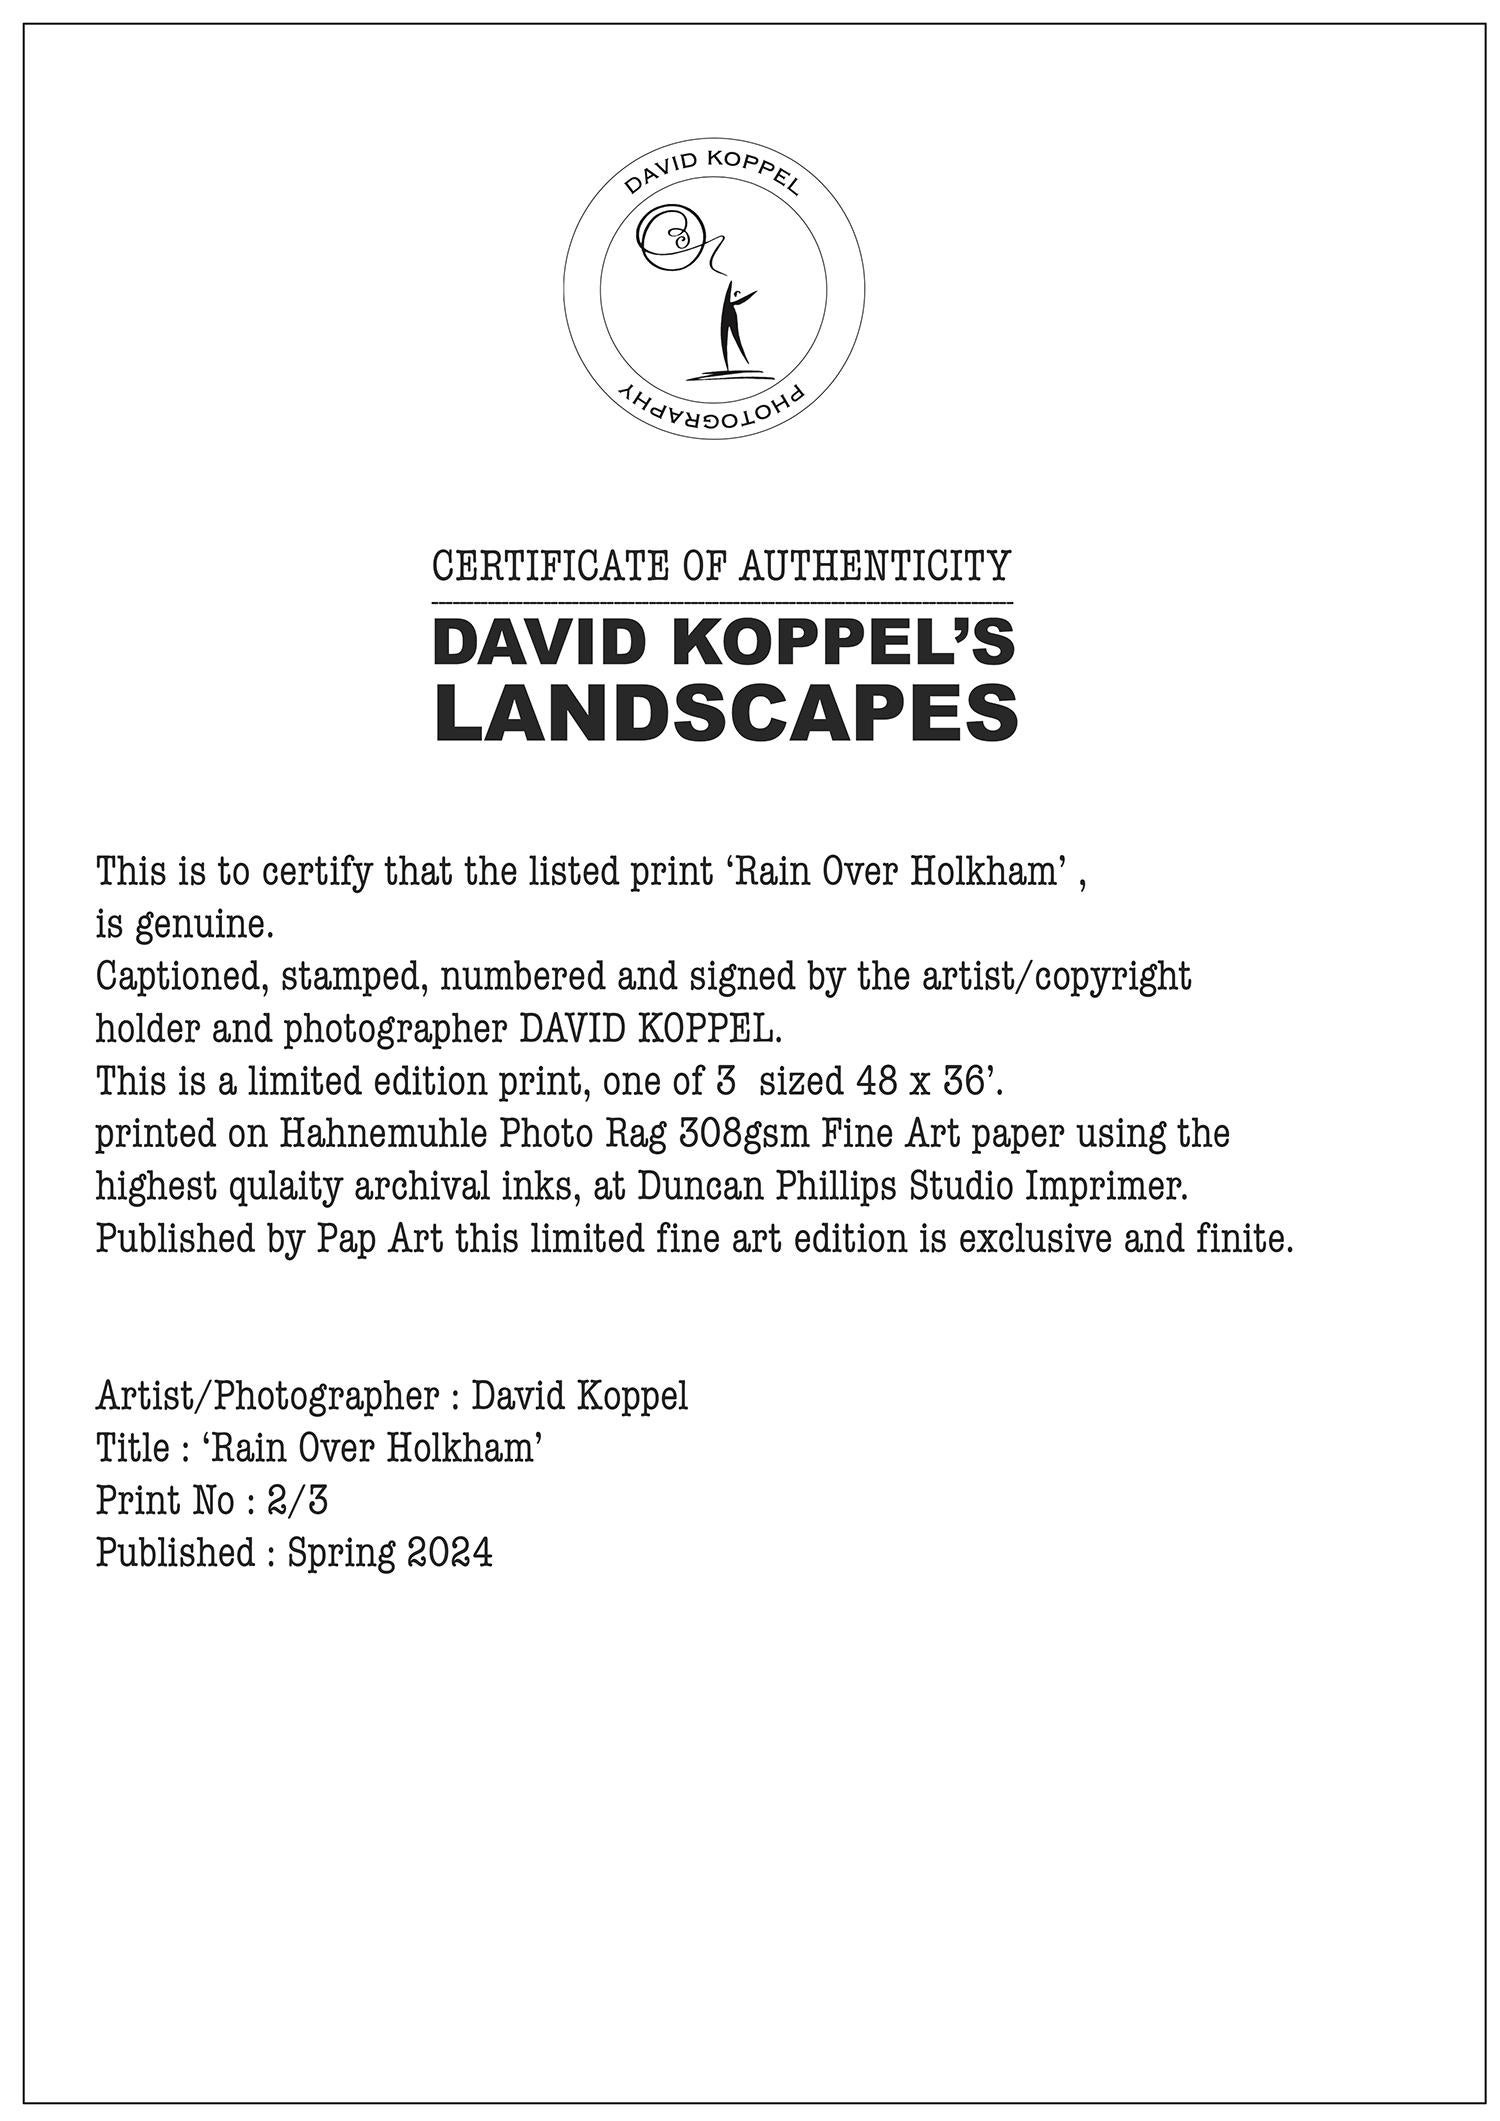 Limited Edition large scale ( 44 x 35 inches ) 35mm photograph, taken in Norfolk. One of only three and only available in this size.
David Koppel served his photographic apprenticeship in the rough-and-tumble world of the Fleet Street paparazzi in